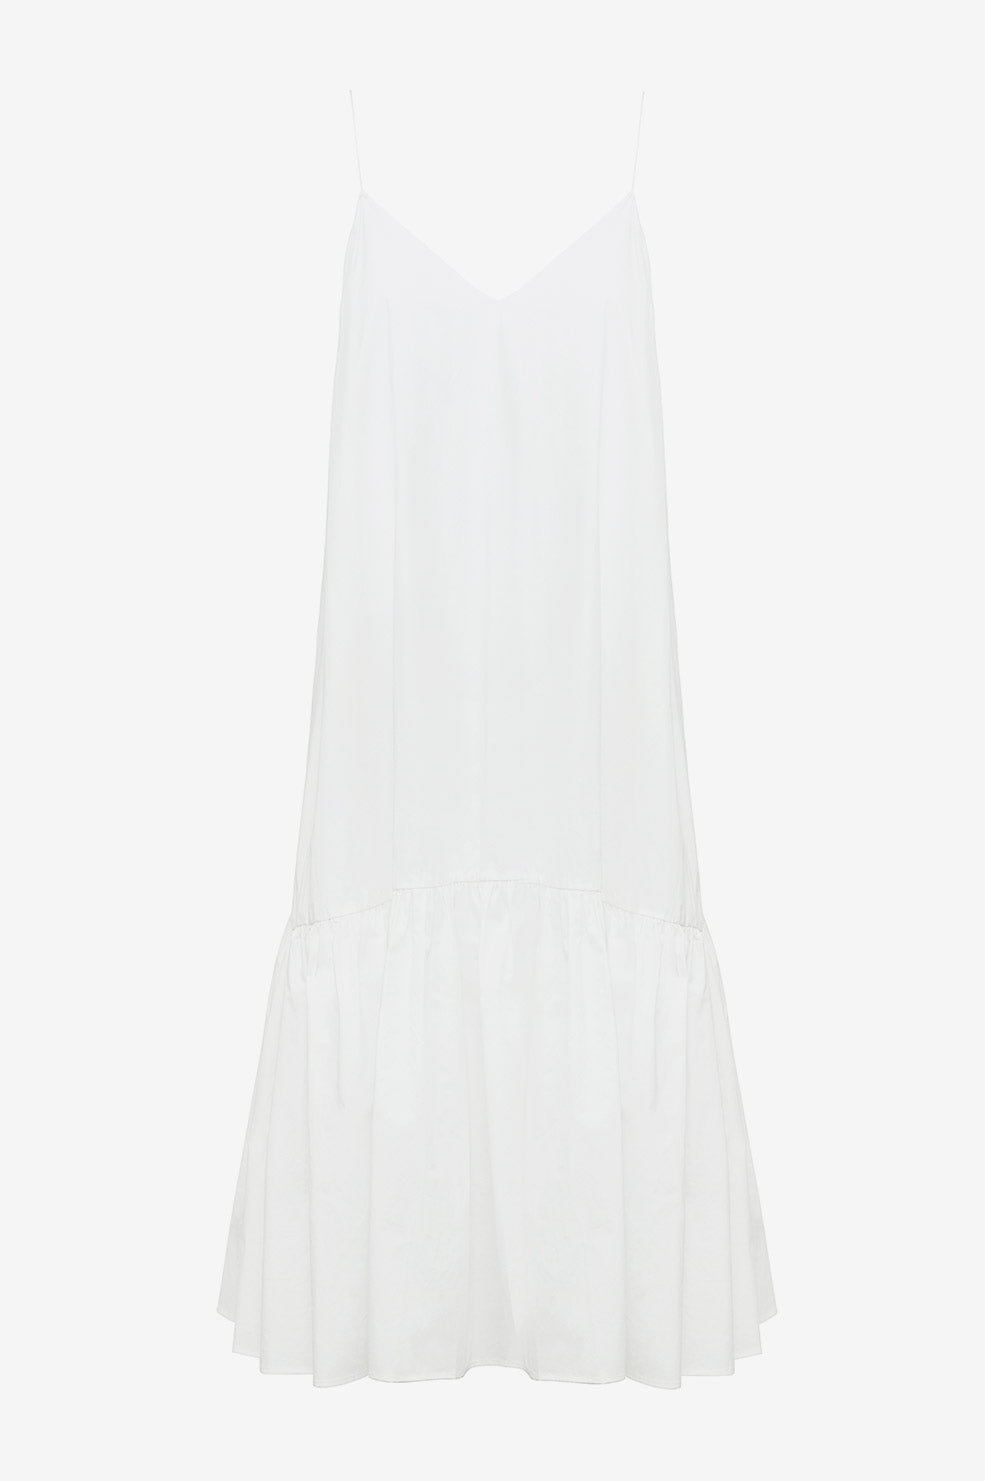 ANINE BING Averie Dress - White - Front View